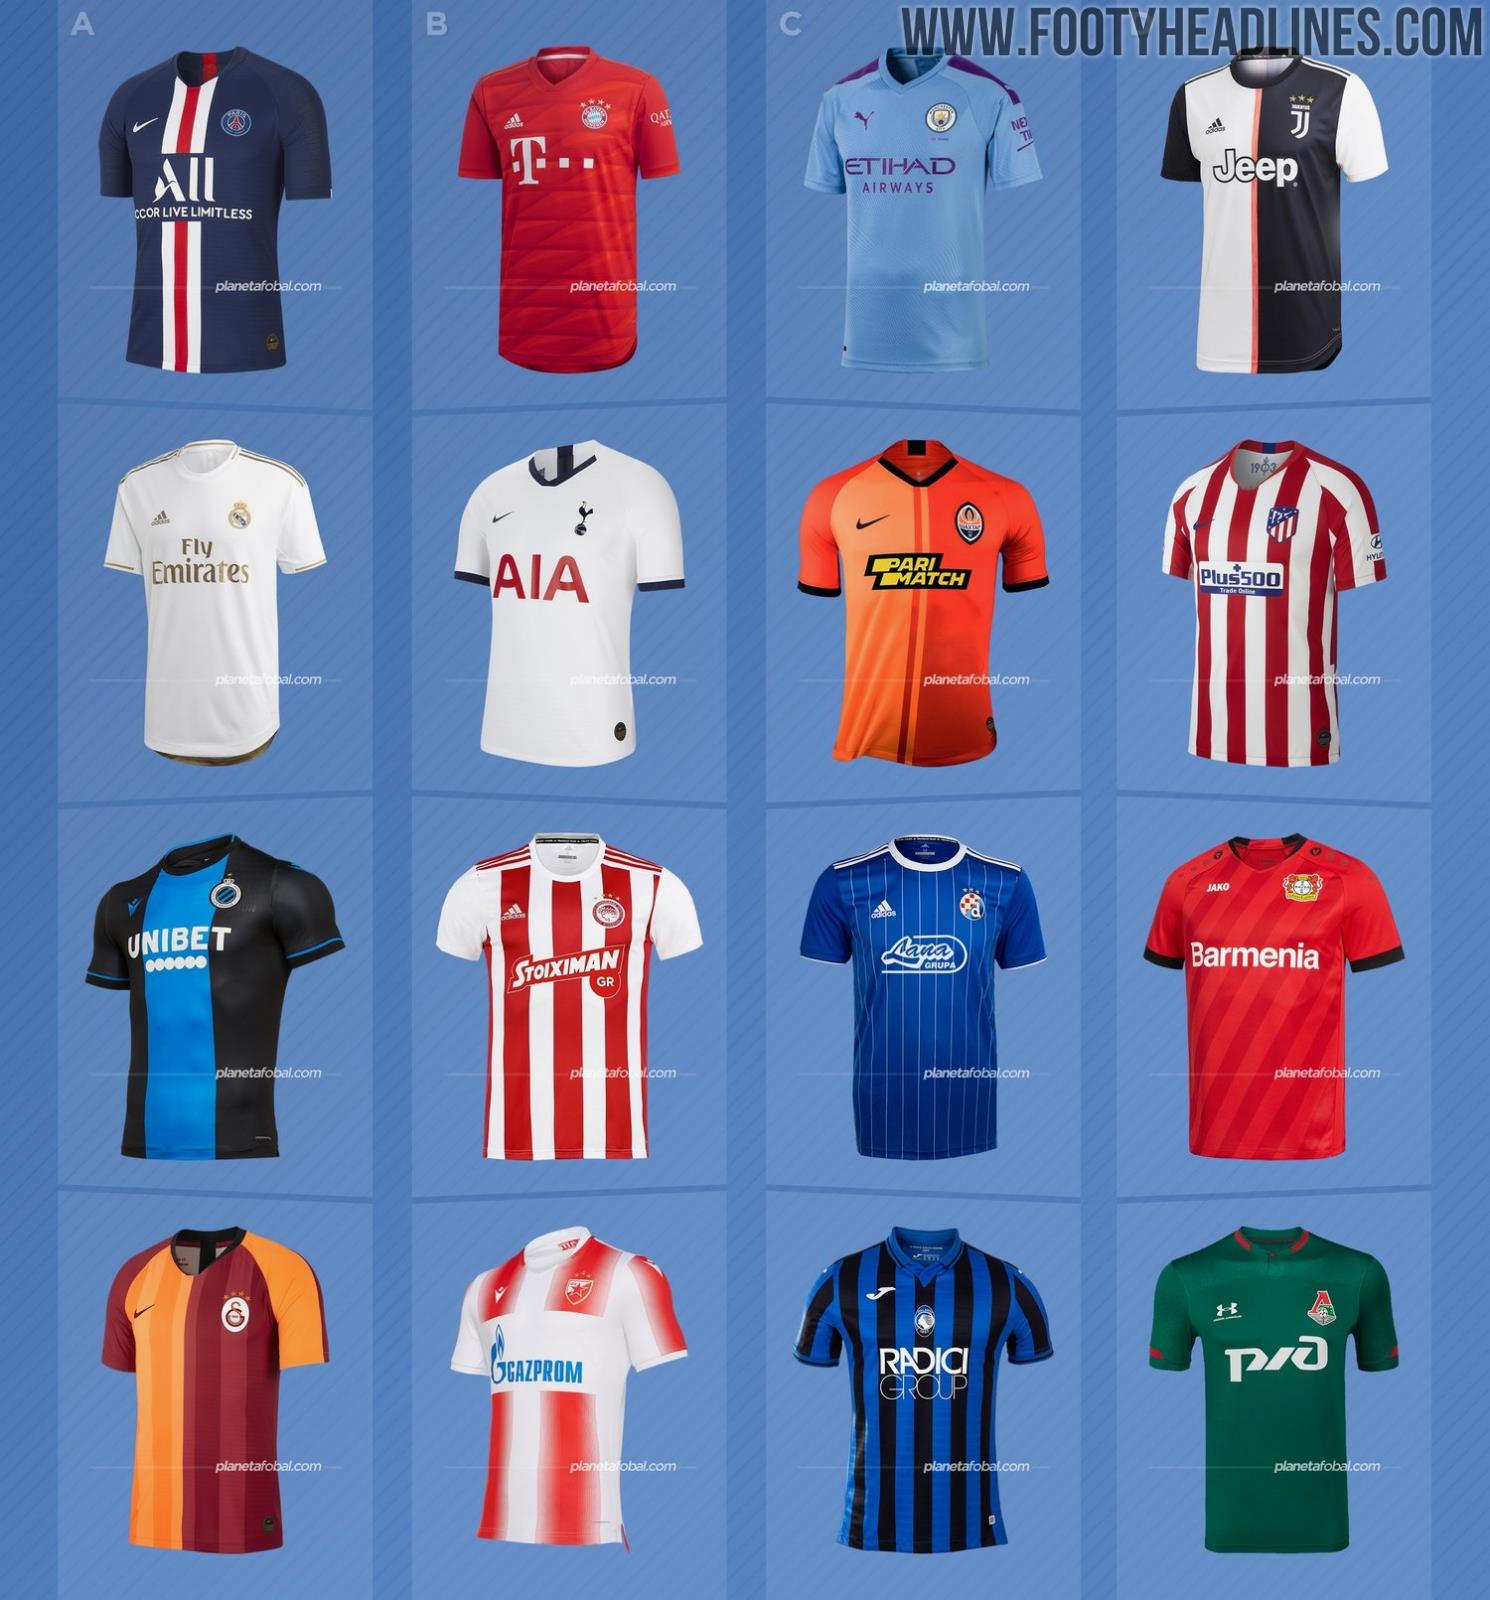 OVERVIEW: All 32 Teams' 2019-20 UEFA Champions League Kits - Footy Headlines